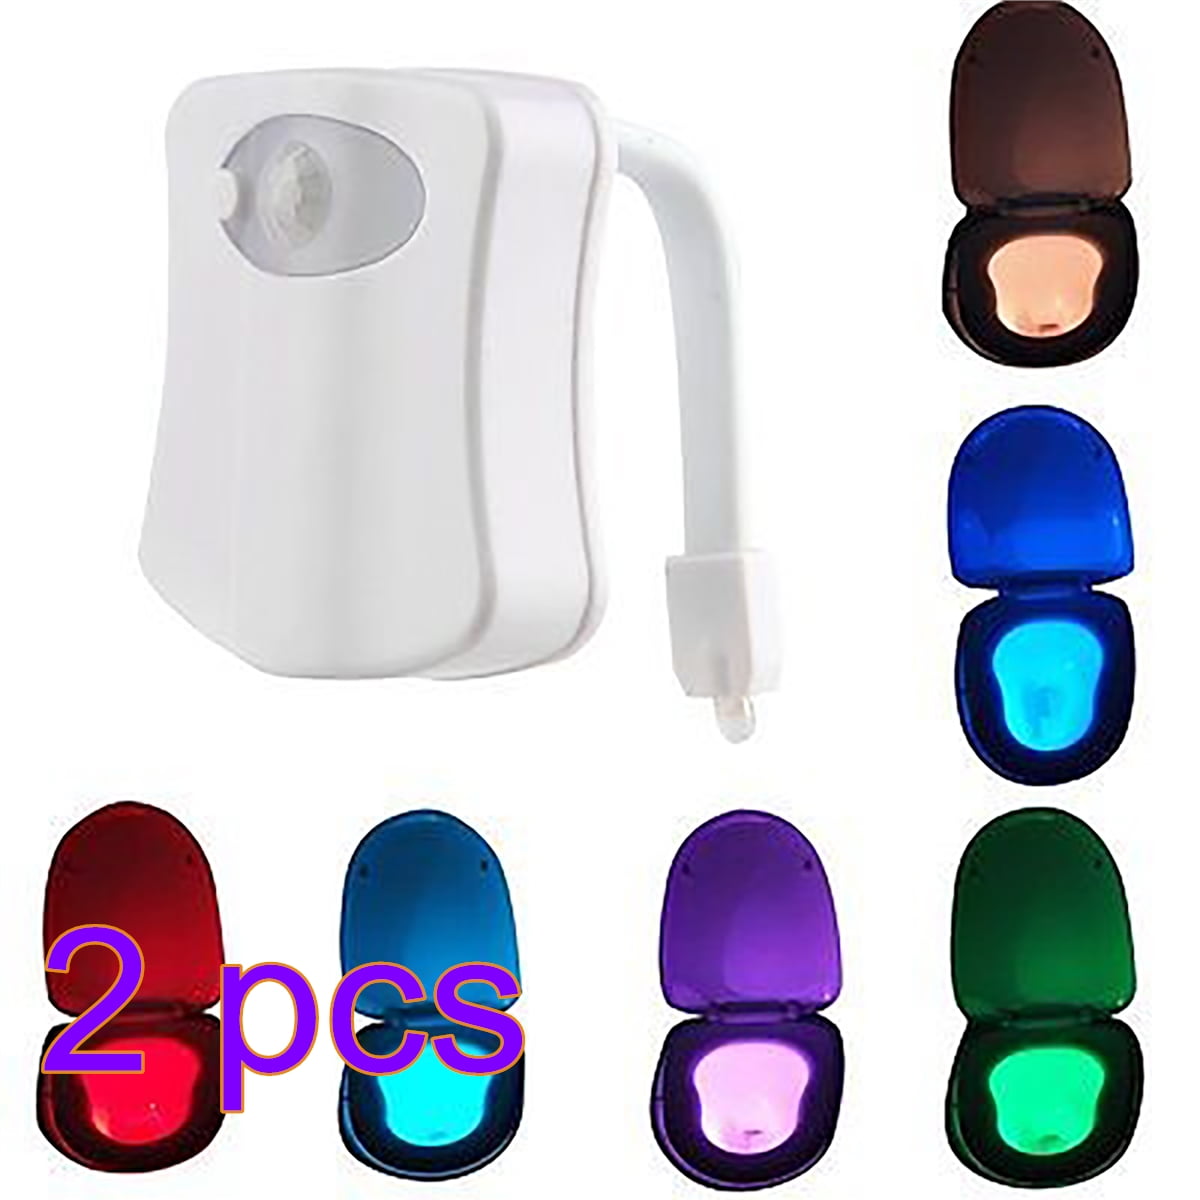 Chunace 16-Color Toilet Night Light, Motion Activated Detection Bathroom Bowl Lights, Unique & Funny Birthday Gifts Idea for Dad Teen Boy Kids Men Women, Cool